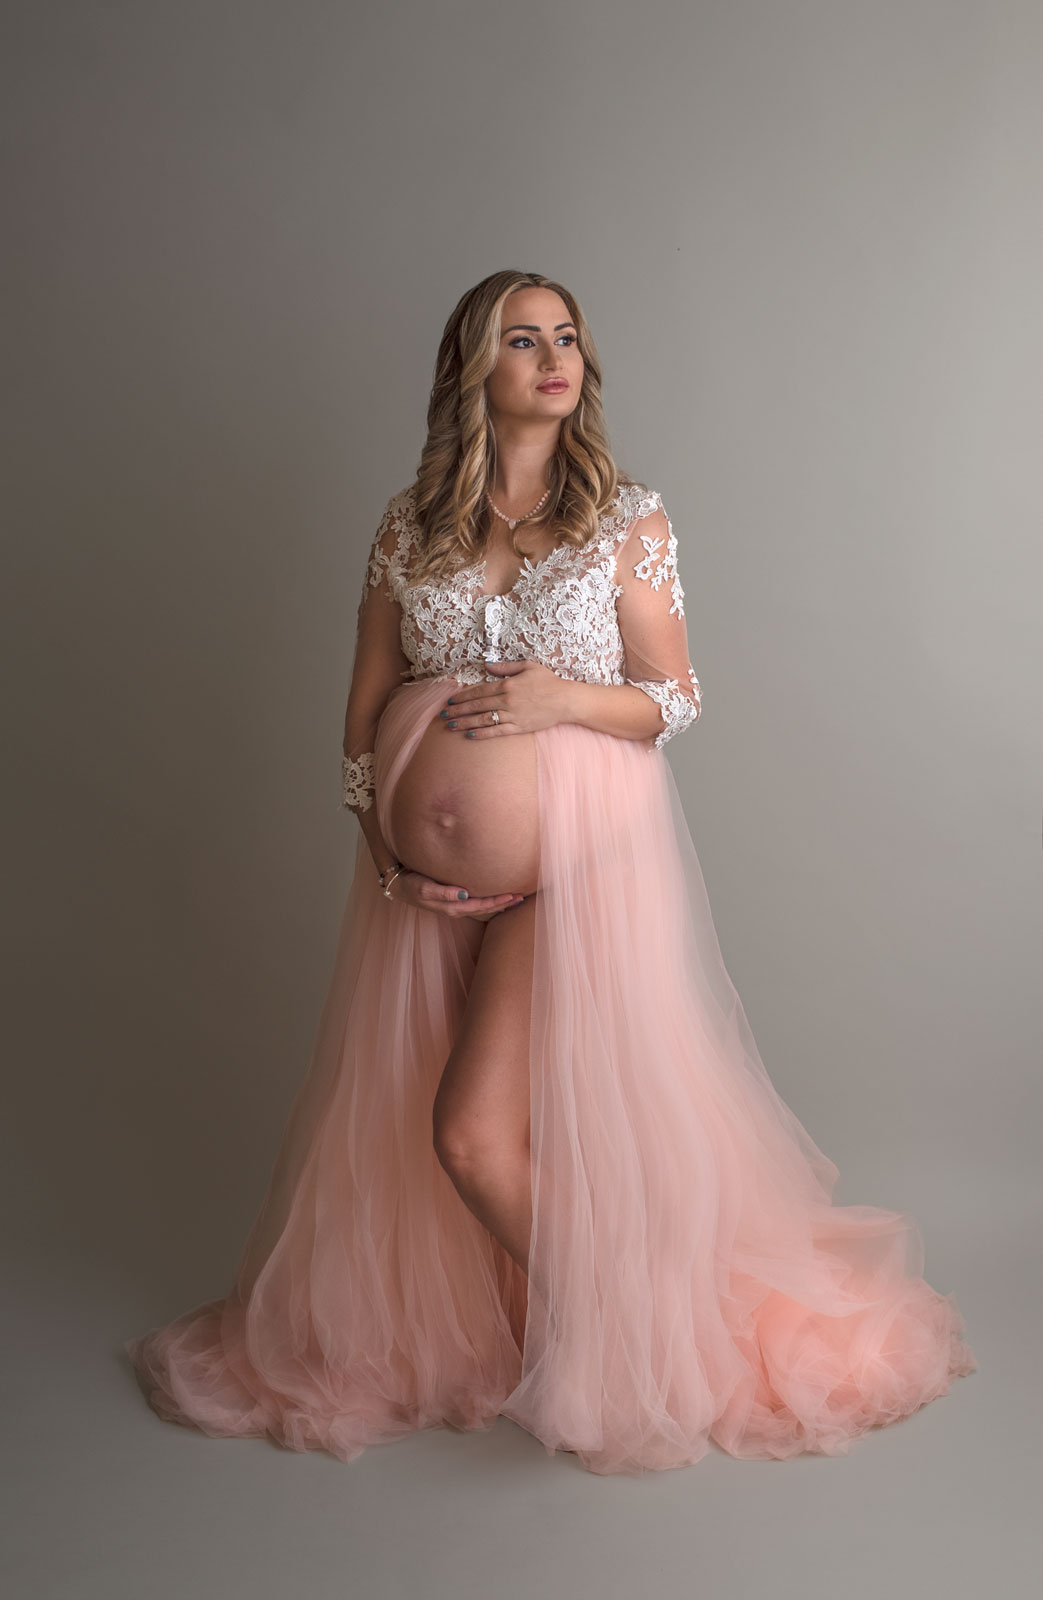 A mother to be stands in a studio wearing a maternity dress with white lace on top and pink velour draping around her bump St. louis maternity clothes